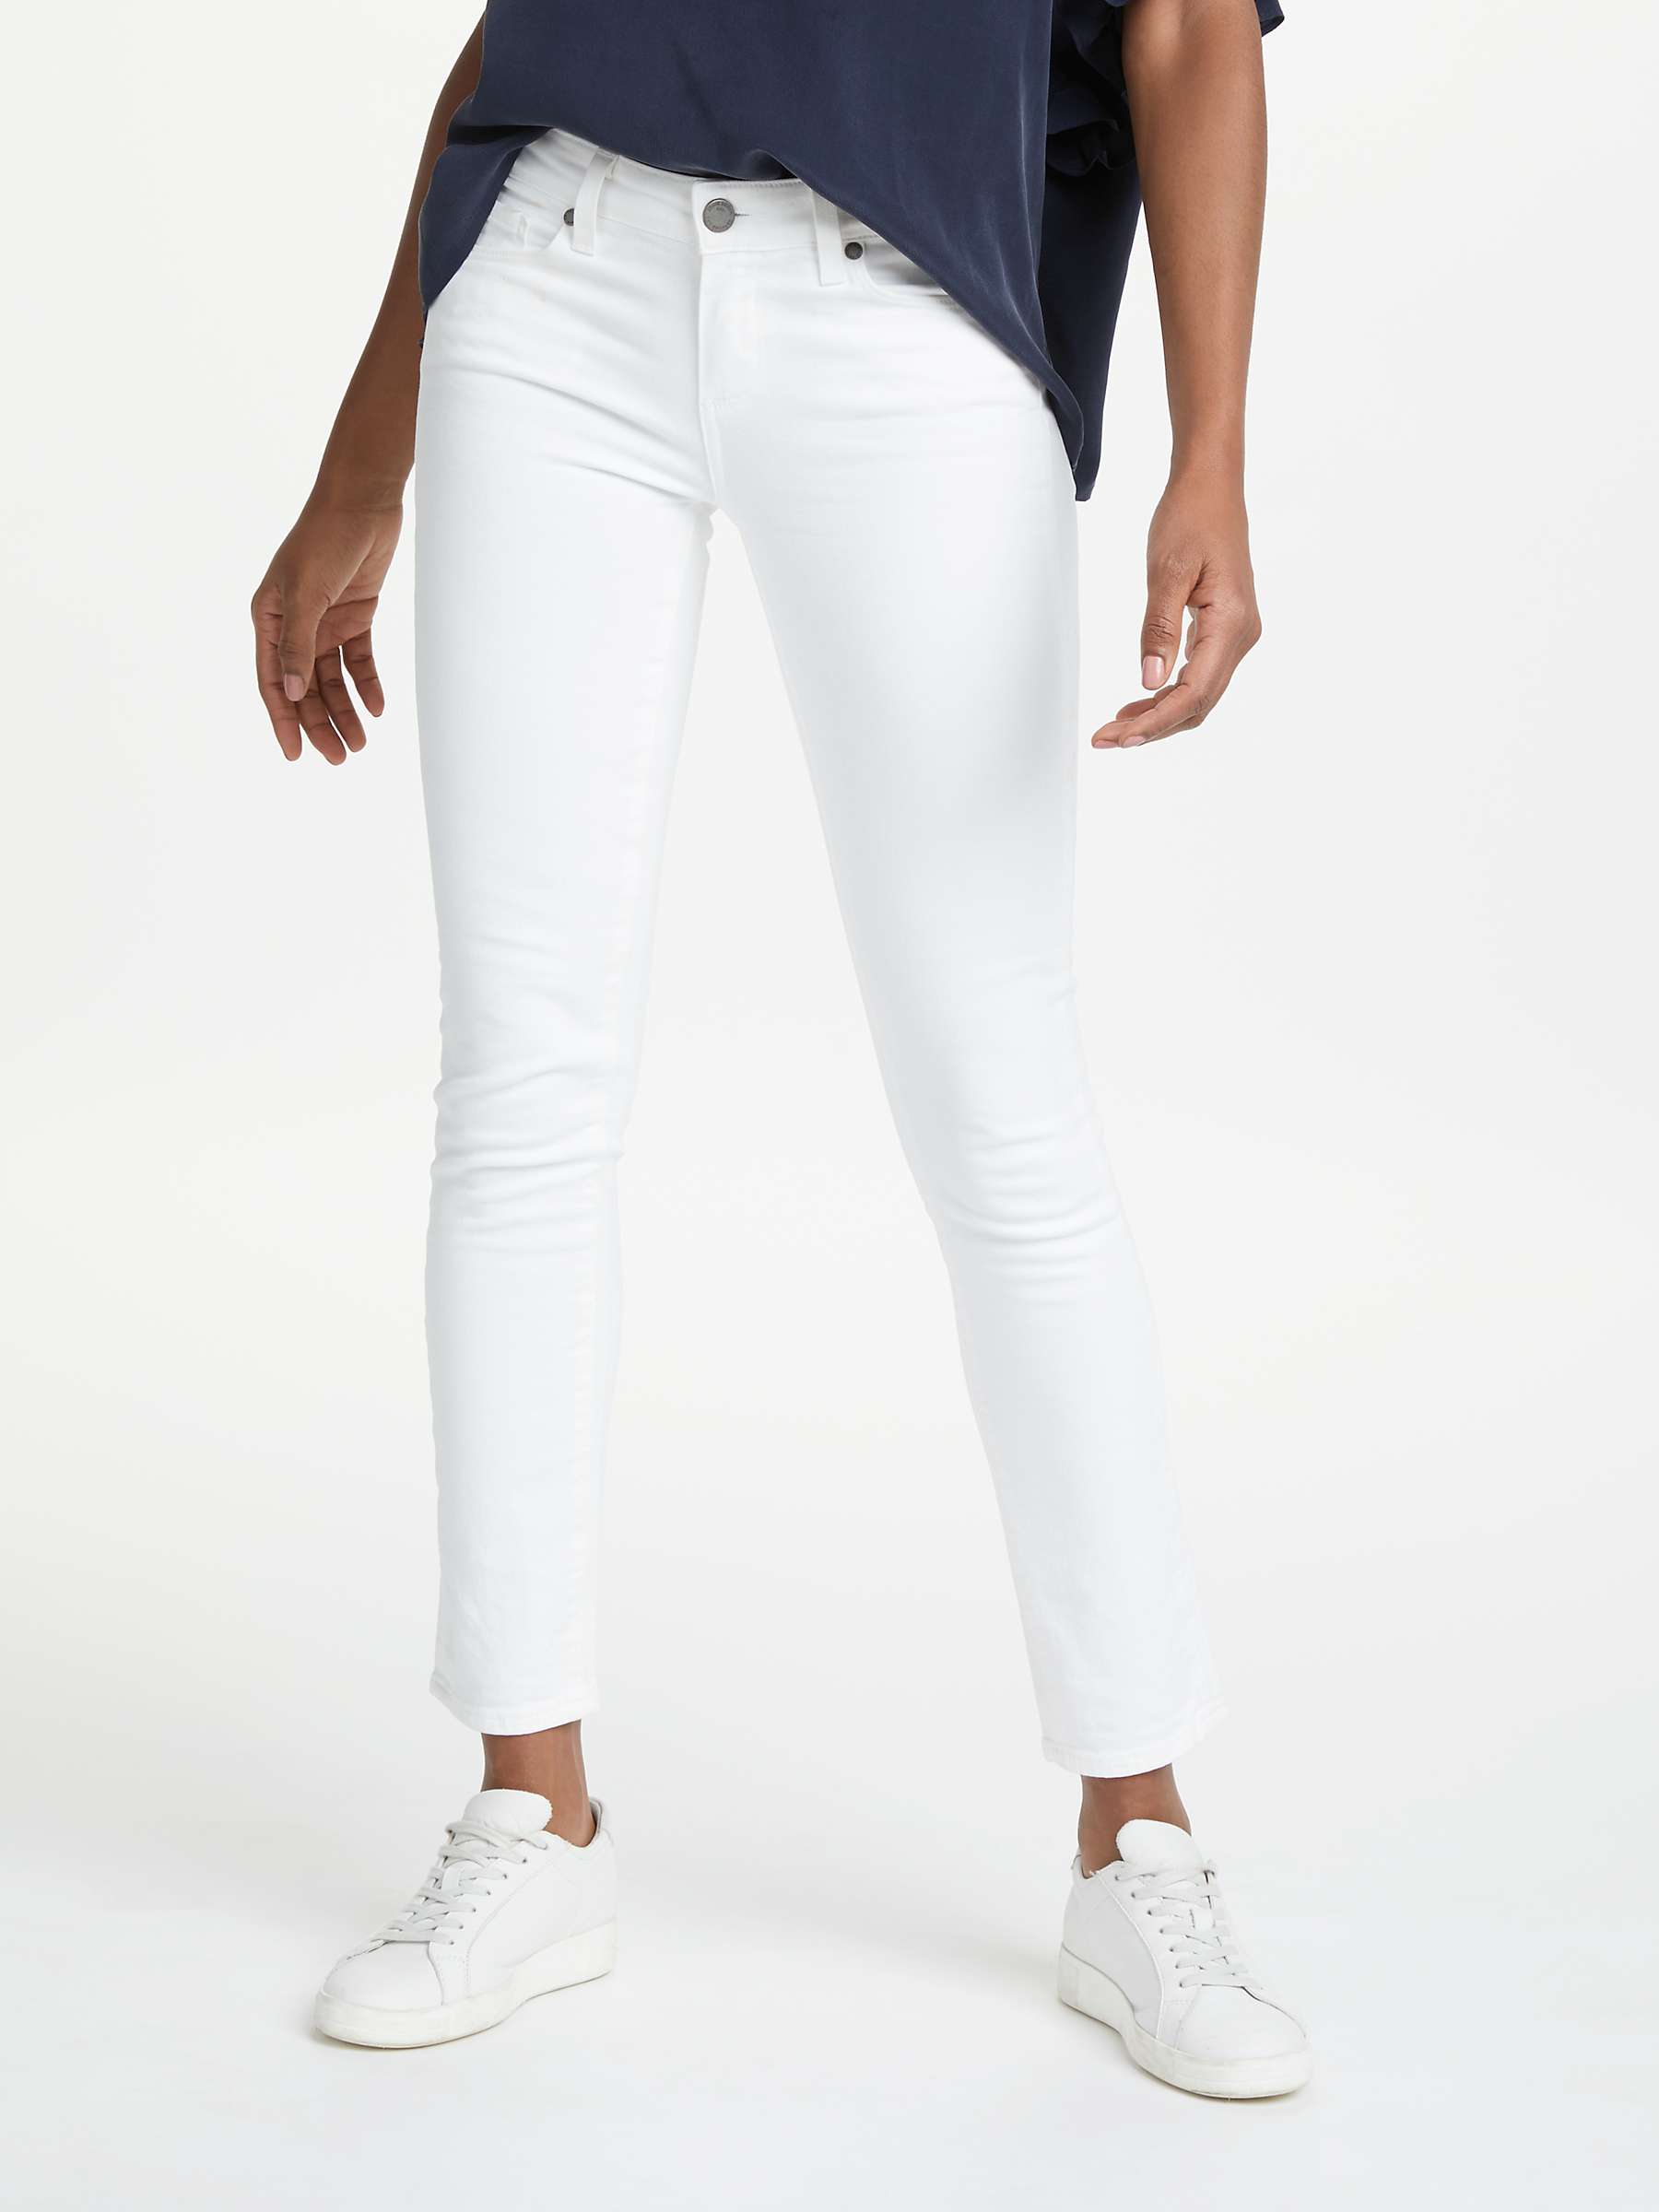 Buy PAIGE Skyline Skinny Jeans, Optic White Online at johnlewis.com